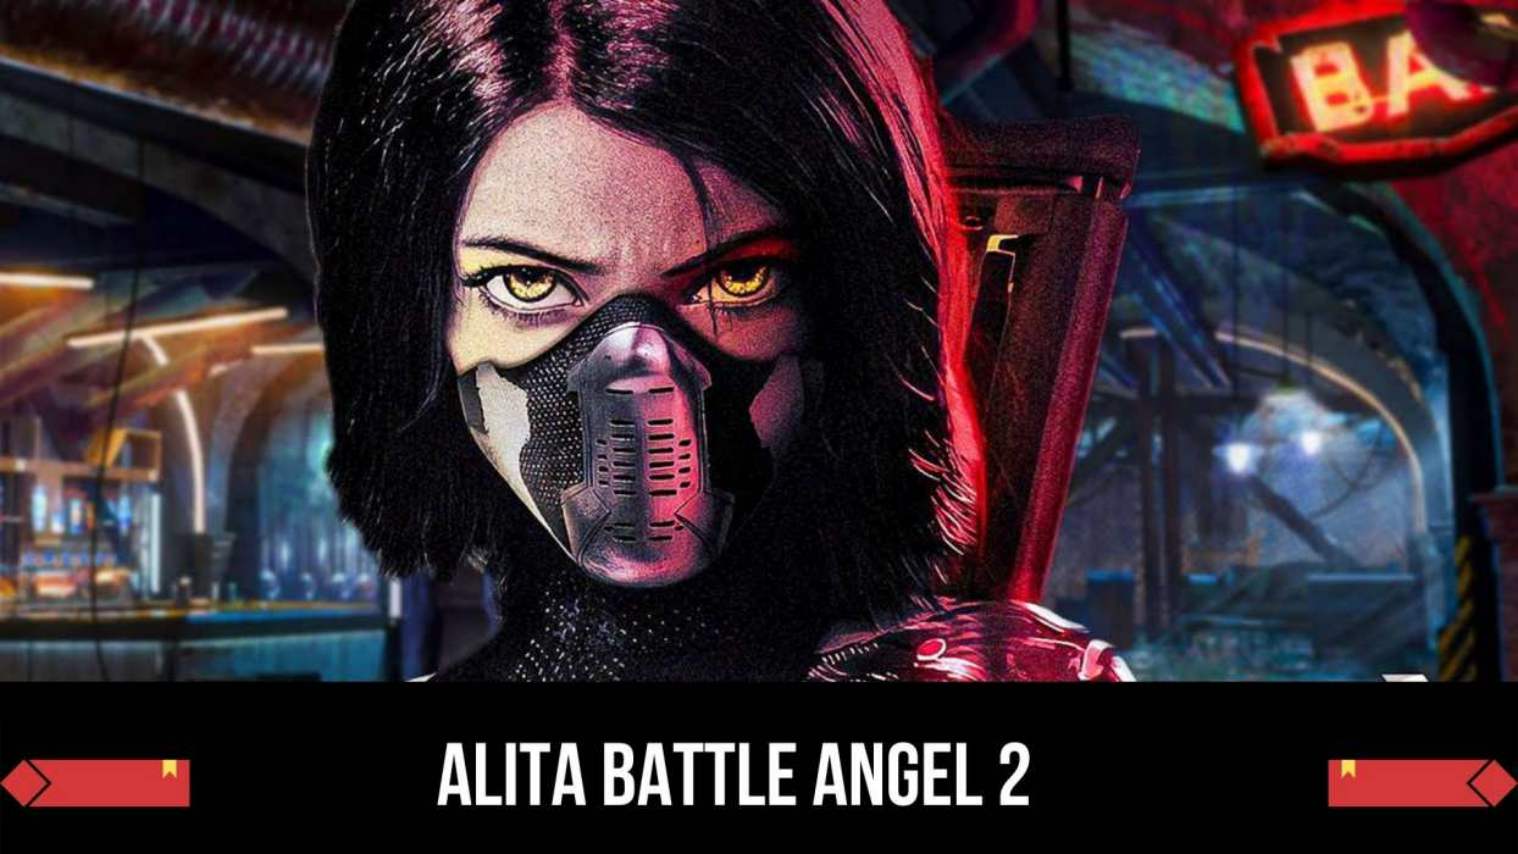 Alita Battle Angel 2 Movie: All The Latest Updates and Everything We Know So Far